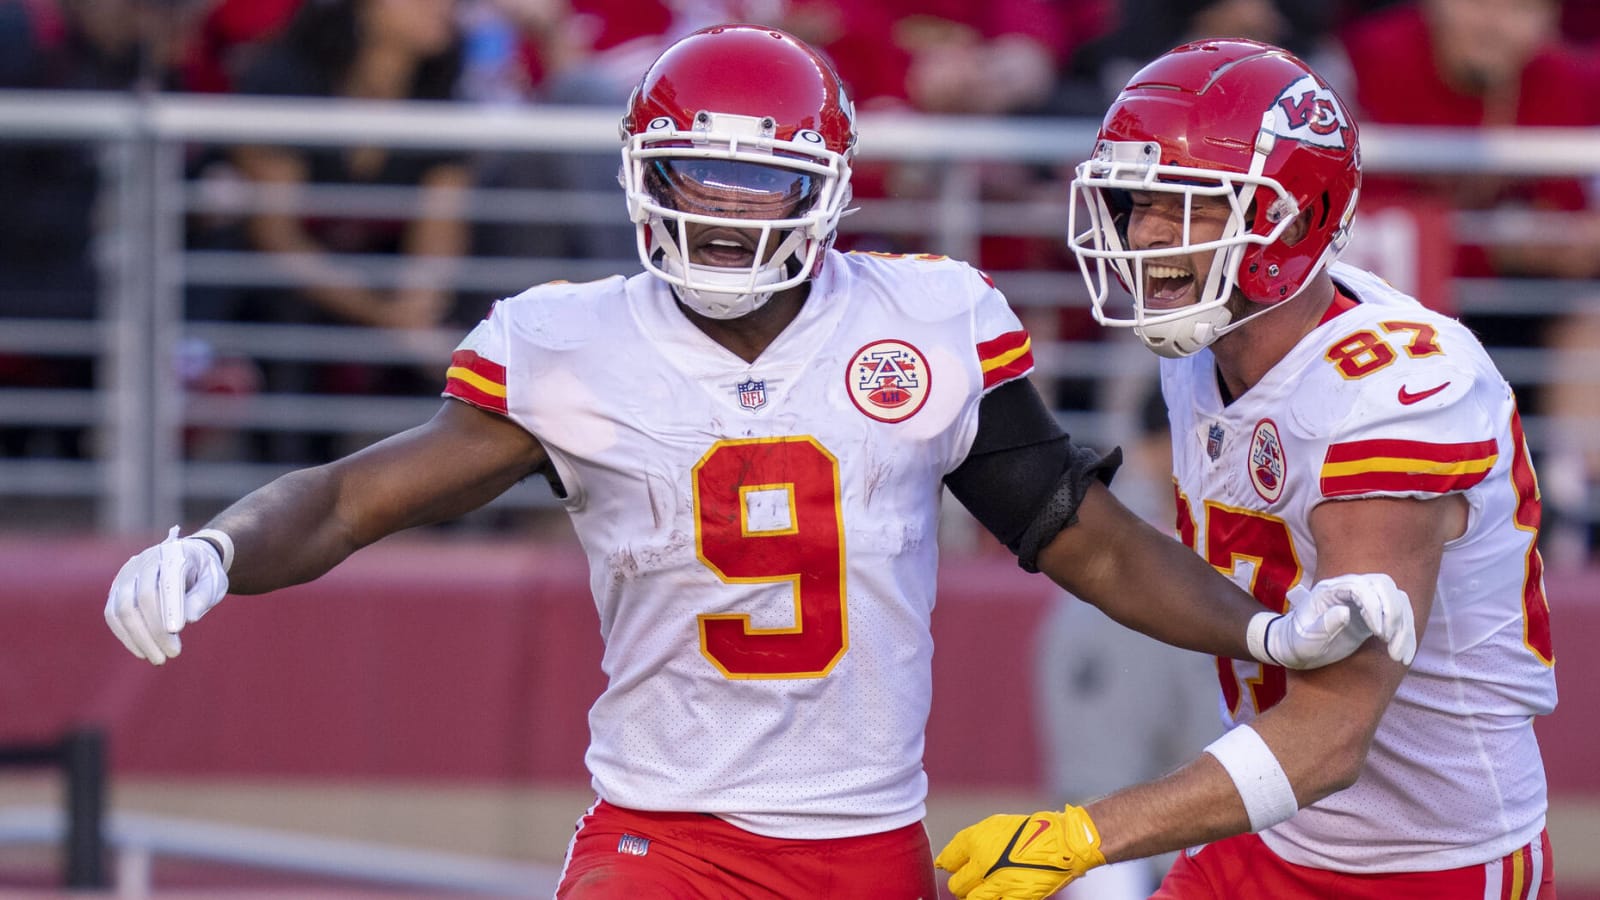 Smith-Schuster has unusual explanation for Chiefs’ big day